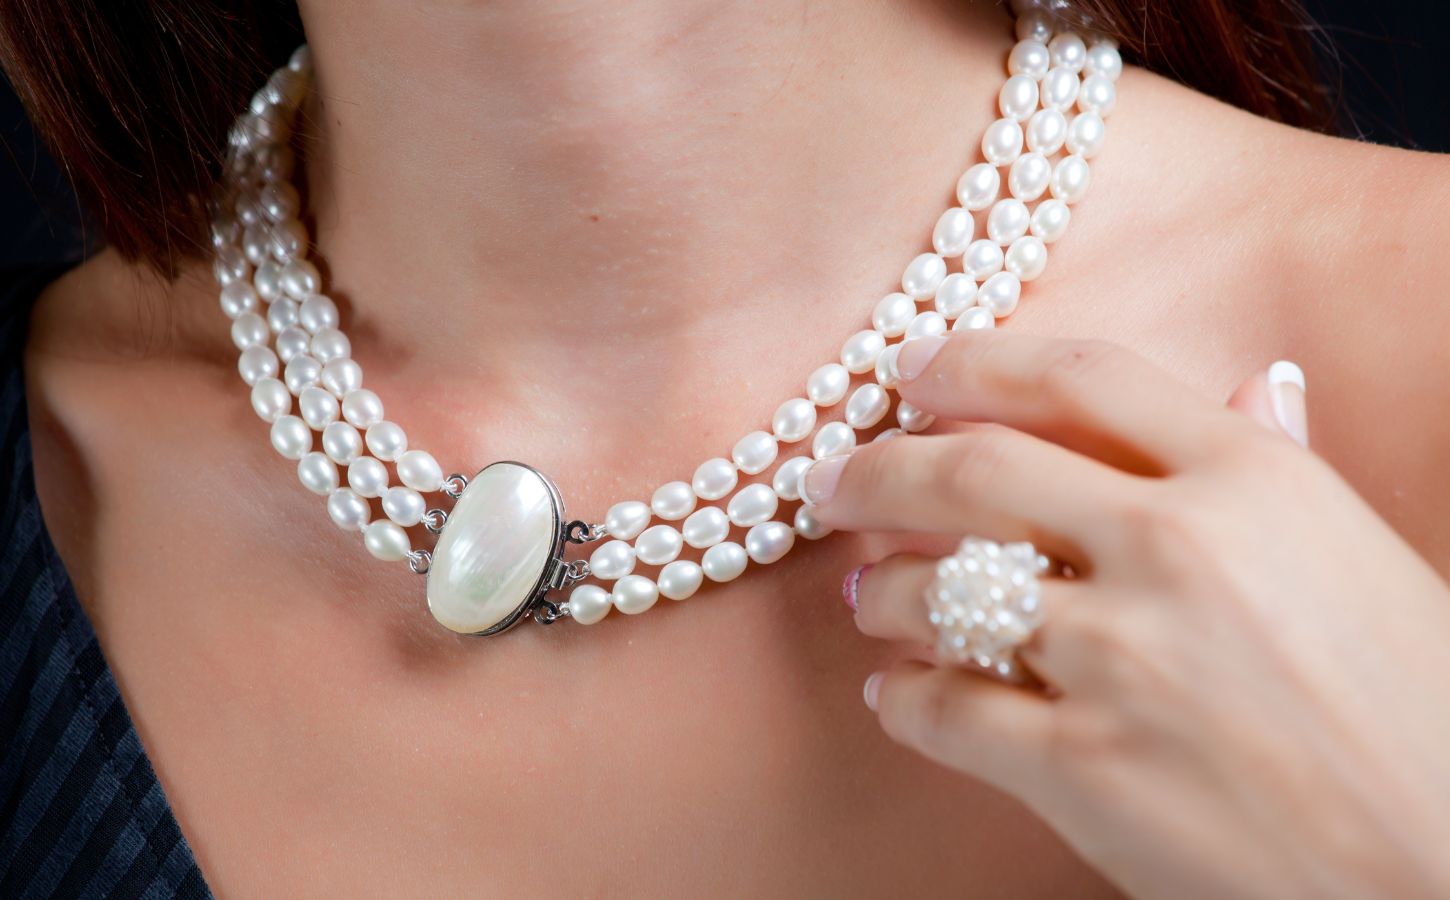 A woman wearing a pearl necklace, which is not suitable for vegans